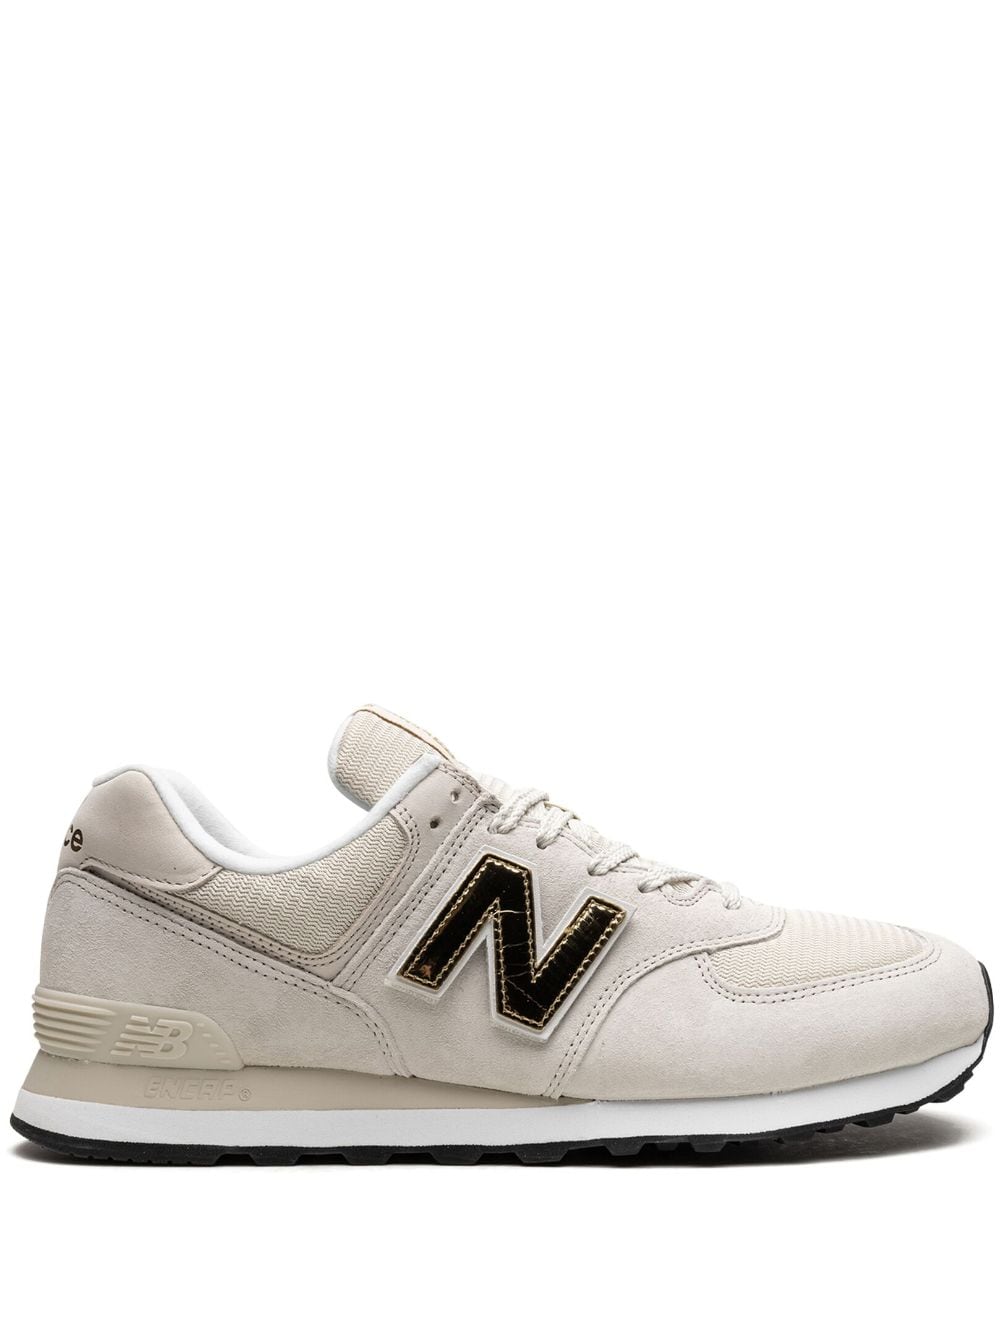 New Balance 574 "Removable Patch" sneakers - Neutrals von New Balance